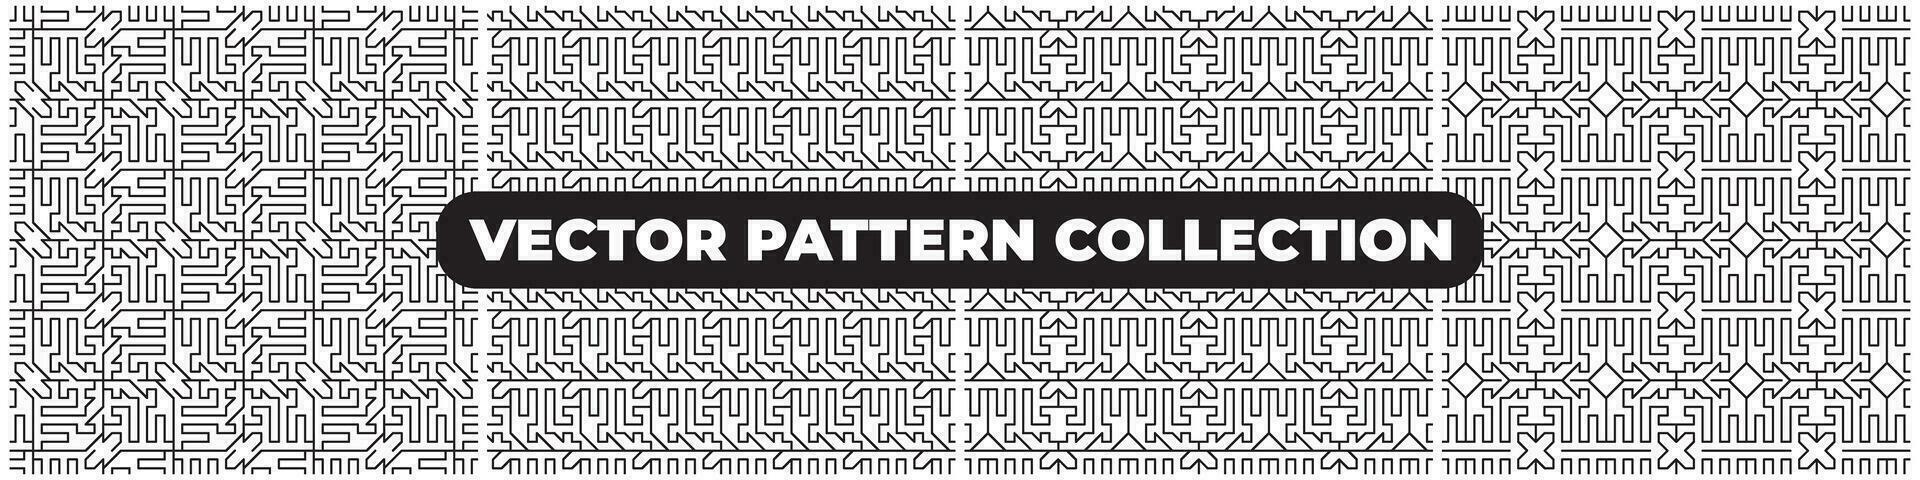 vector pattern colletion